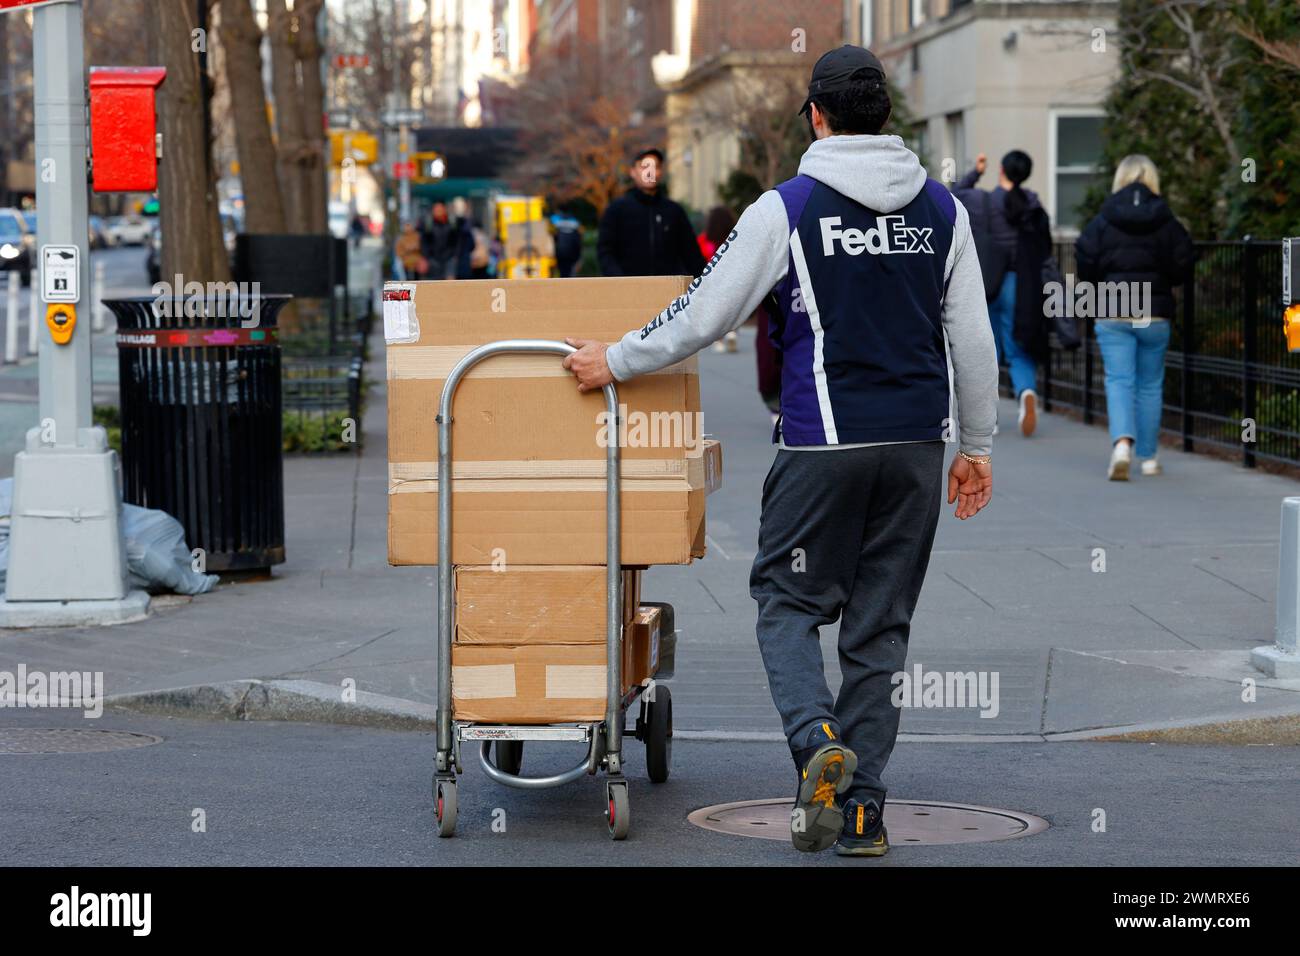 A FedEx worker with a hand truck full of packages walking across a street, New York, NYC. Stock Photo